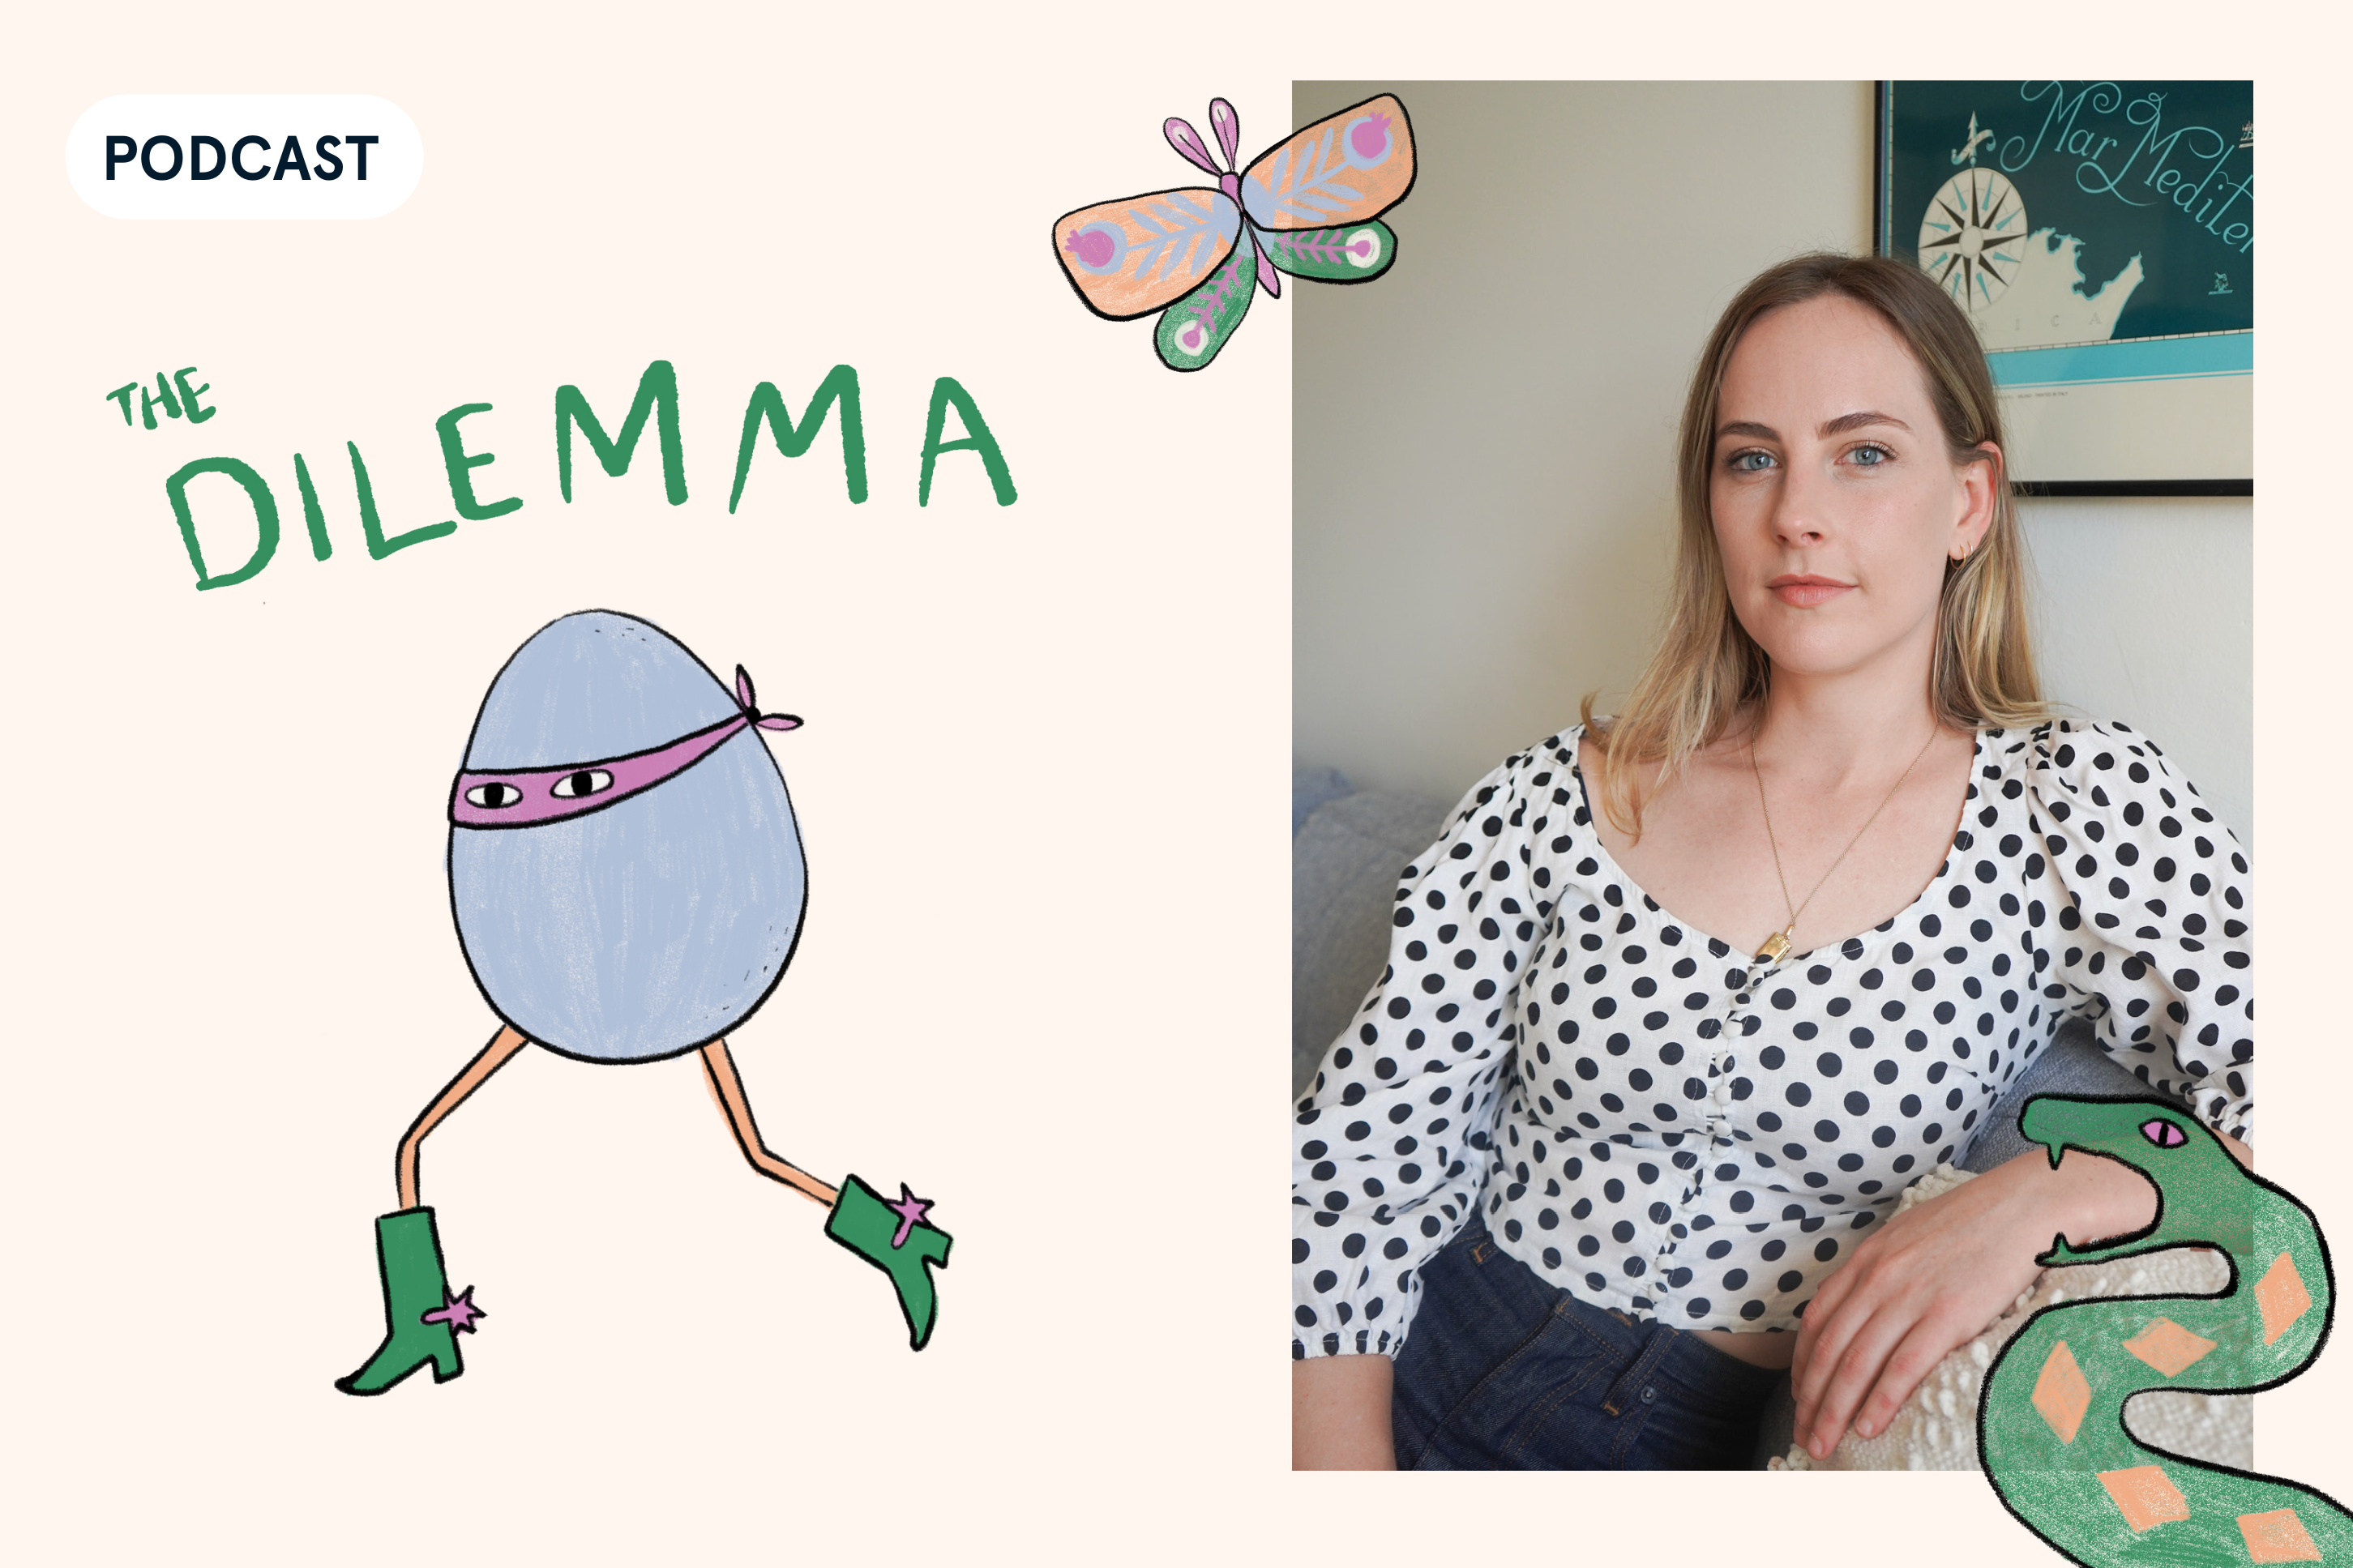 ID: cream background. On right is a pic of Gina, seated at a couch looking like someone you'd like to start a conversation with. She's surrounded by gentle and funny illustrations of a butterfly, a snake (which appears to be biting her hand). On the left is the logo for the podcast The Dilemma, featuring another illustration in the same style of a runaway bandit egg in green cowboy boots. What a hoot.